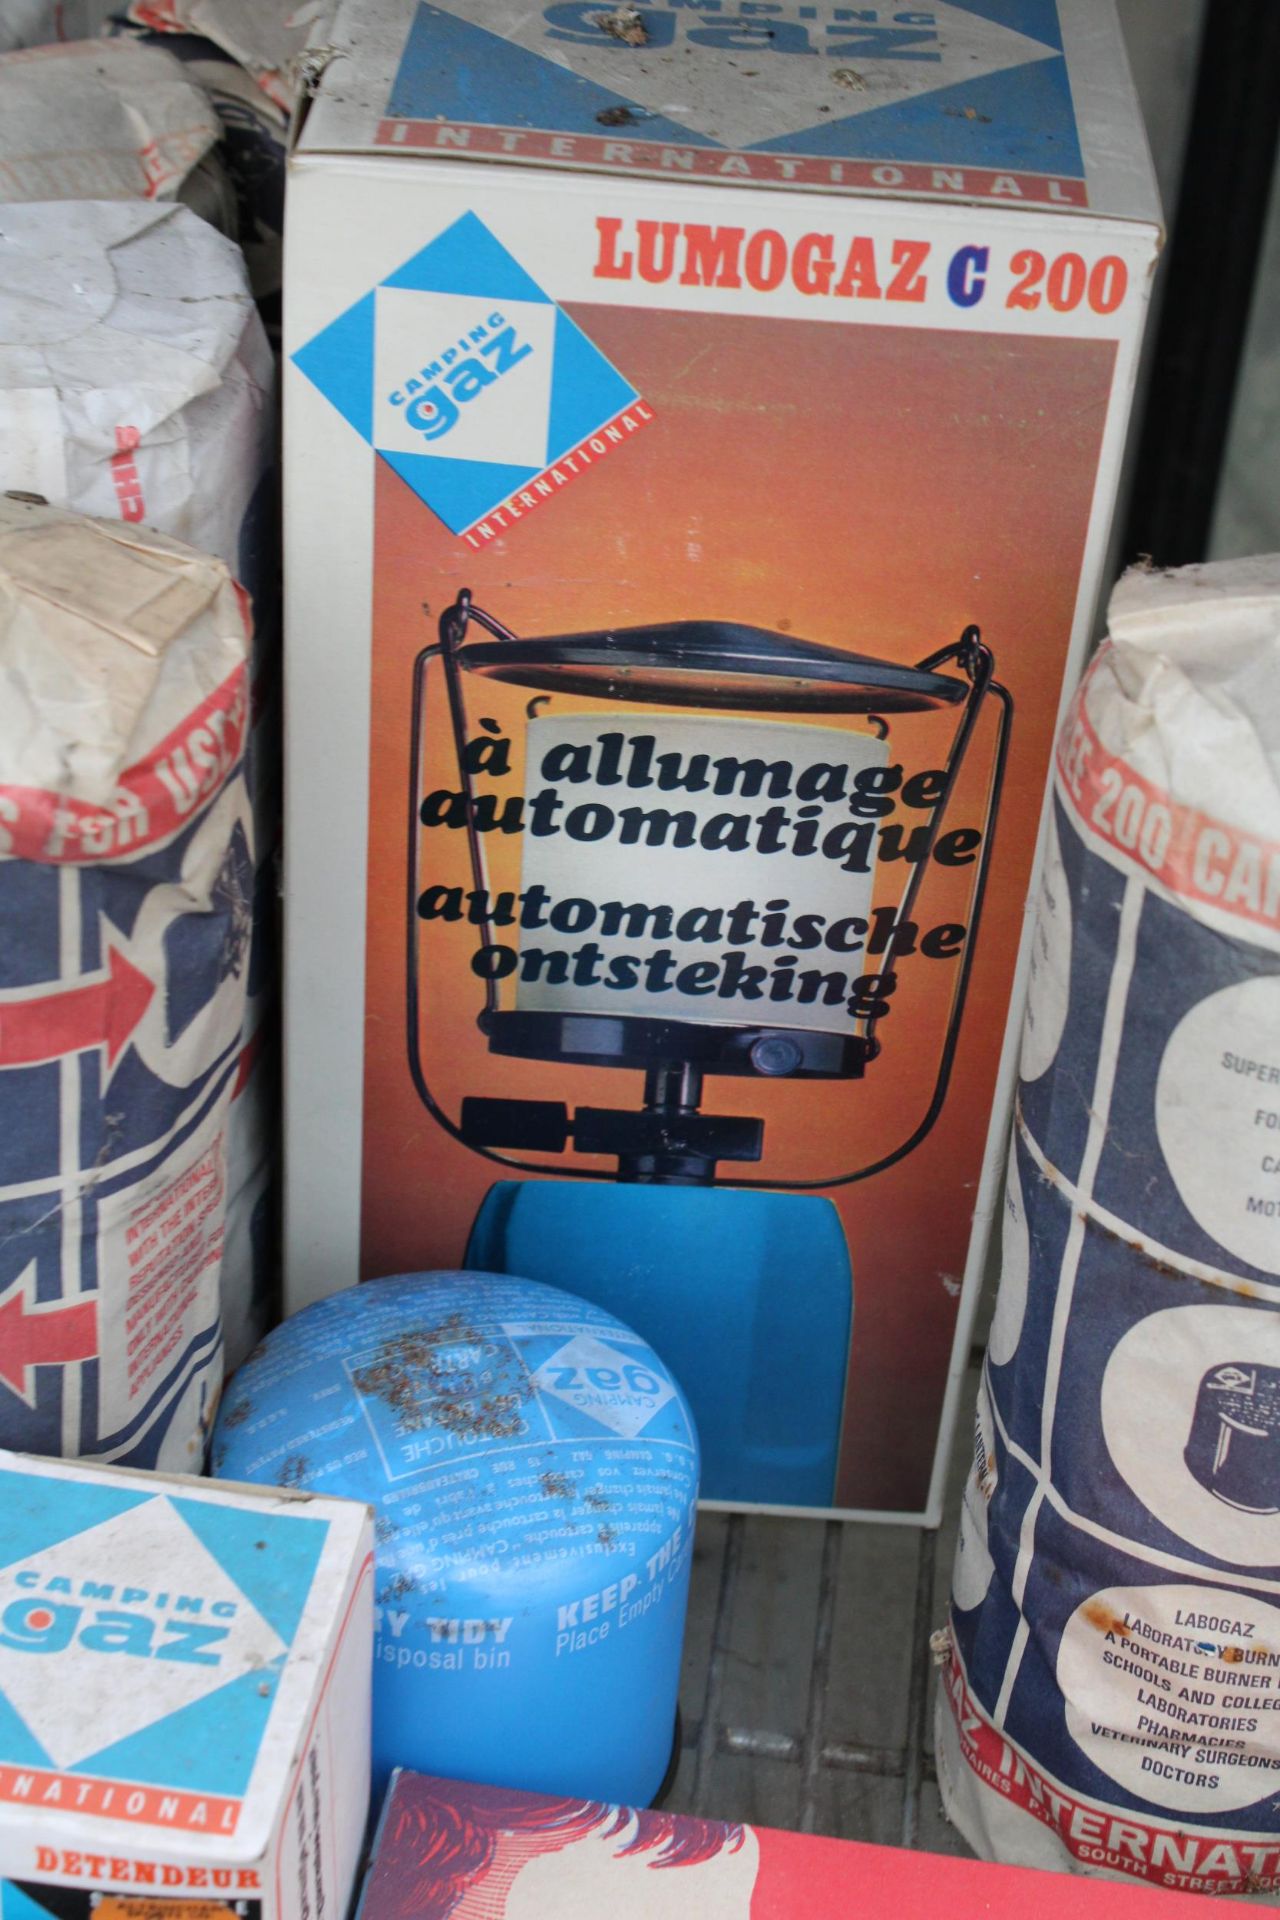 A CAMPING GAZ STOVE, A CAMPING GAZ LIGHT AND A LARGE QUANTITY OF CAMPING GAZ CANISTERS - Image 2 of 2